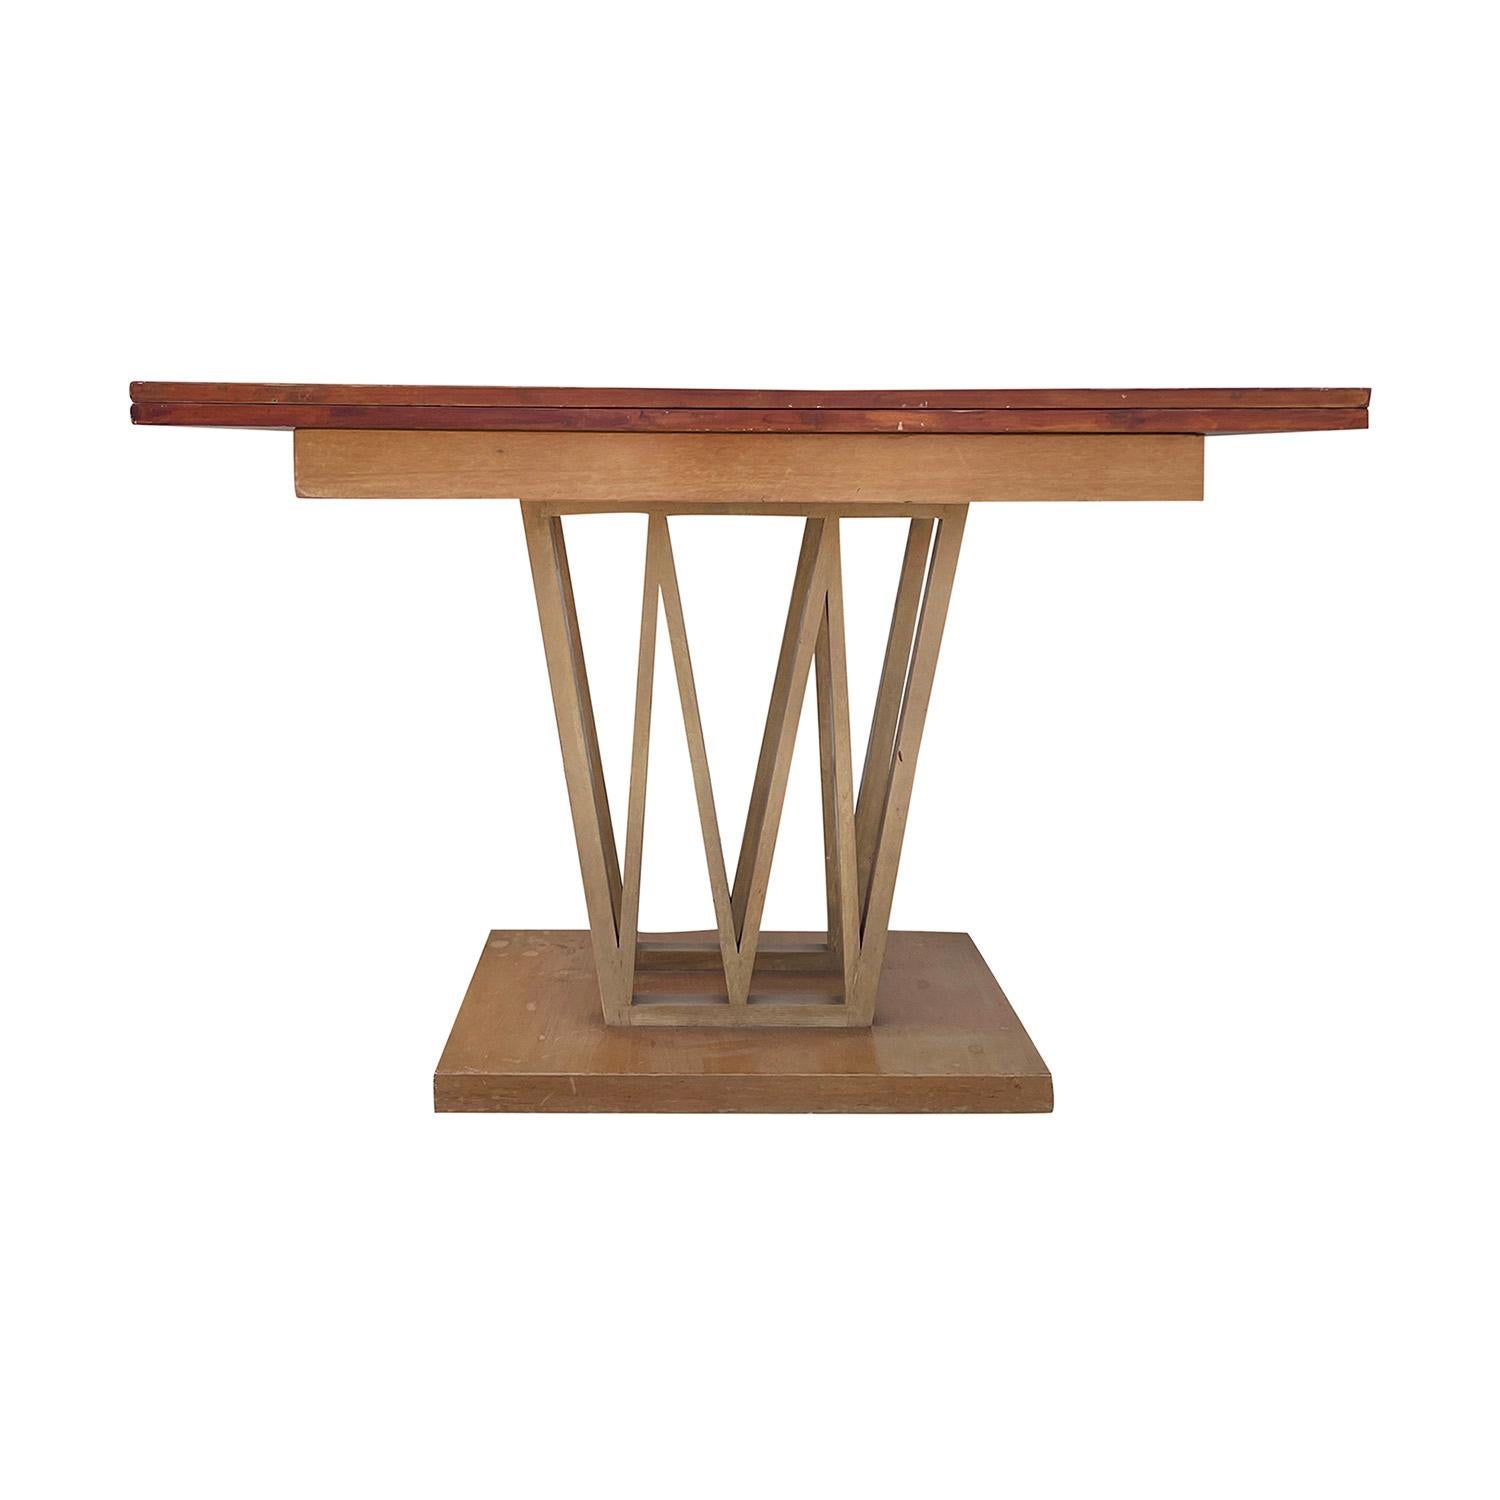 20th Century Danish Vintage Sculptural Folding Walnut Dining, End Table In Good Condition For Sale In West Palm Beach, FL